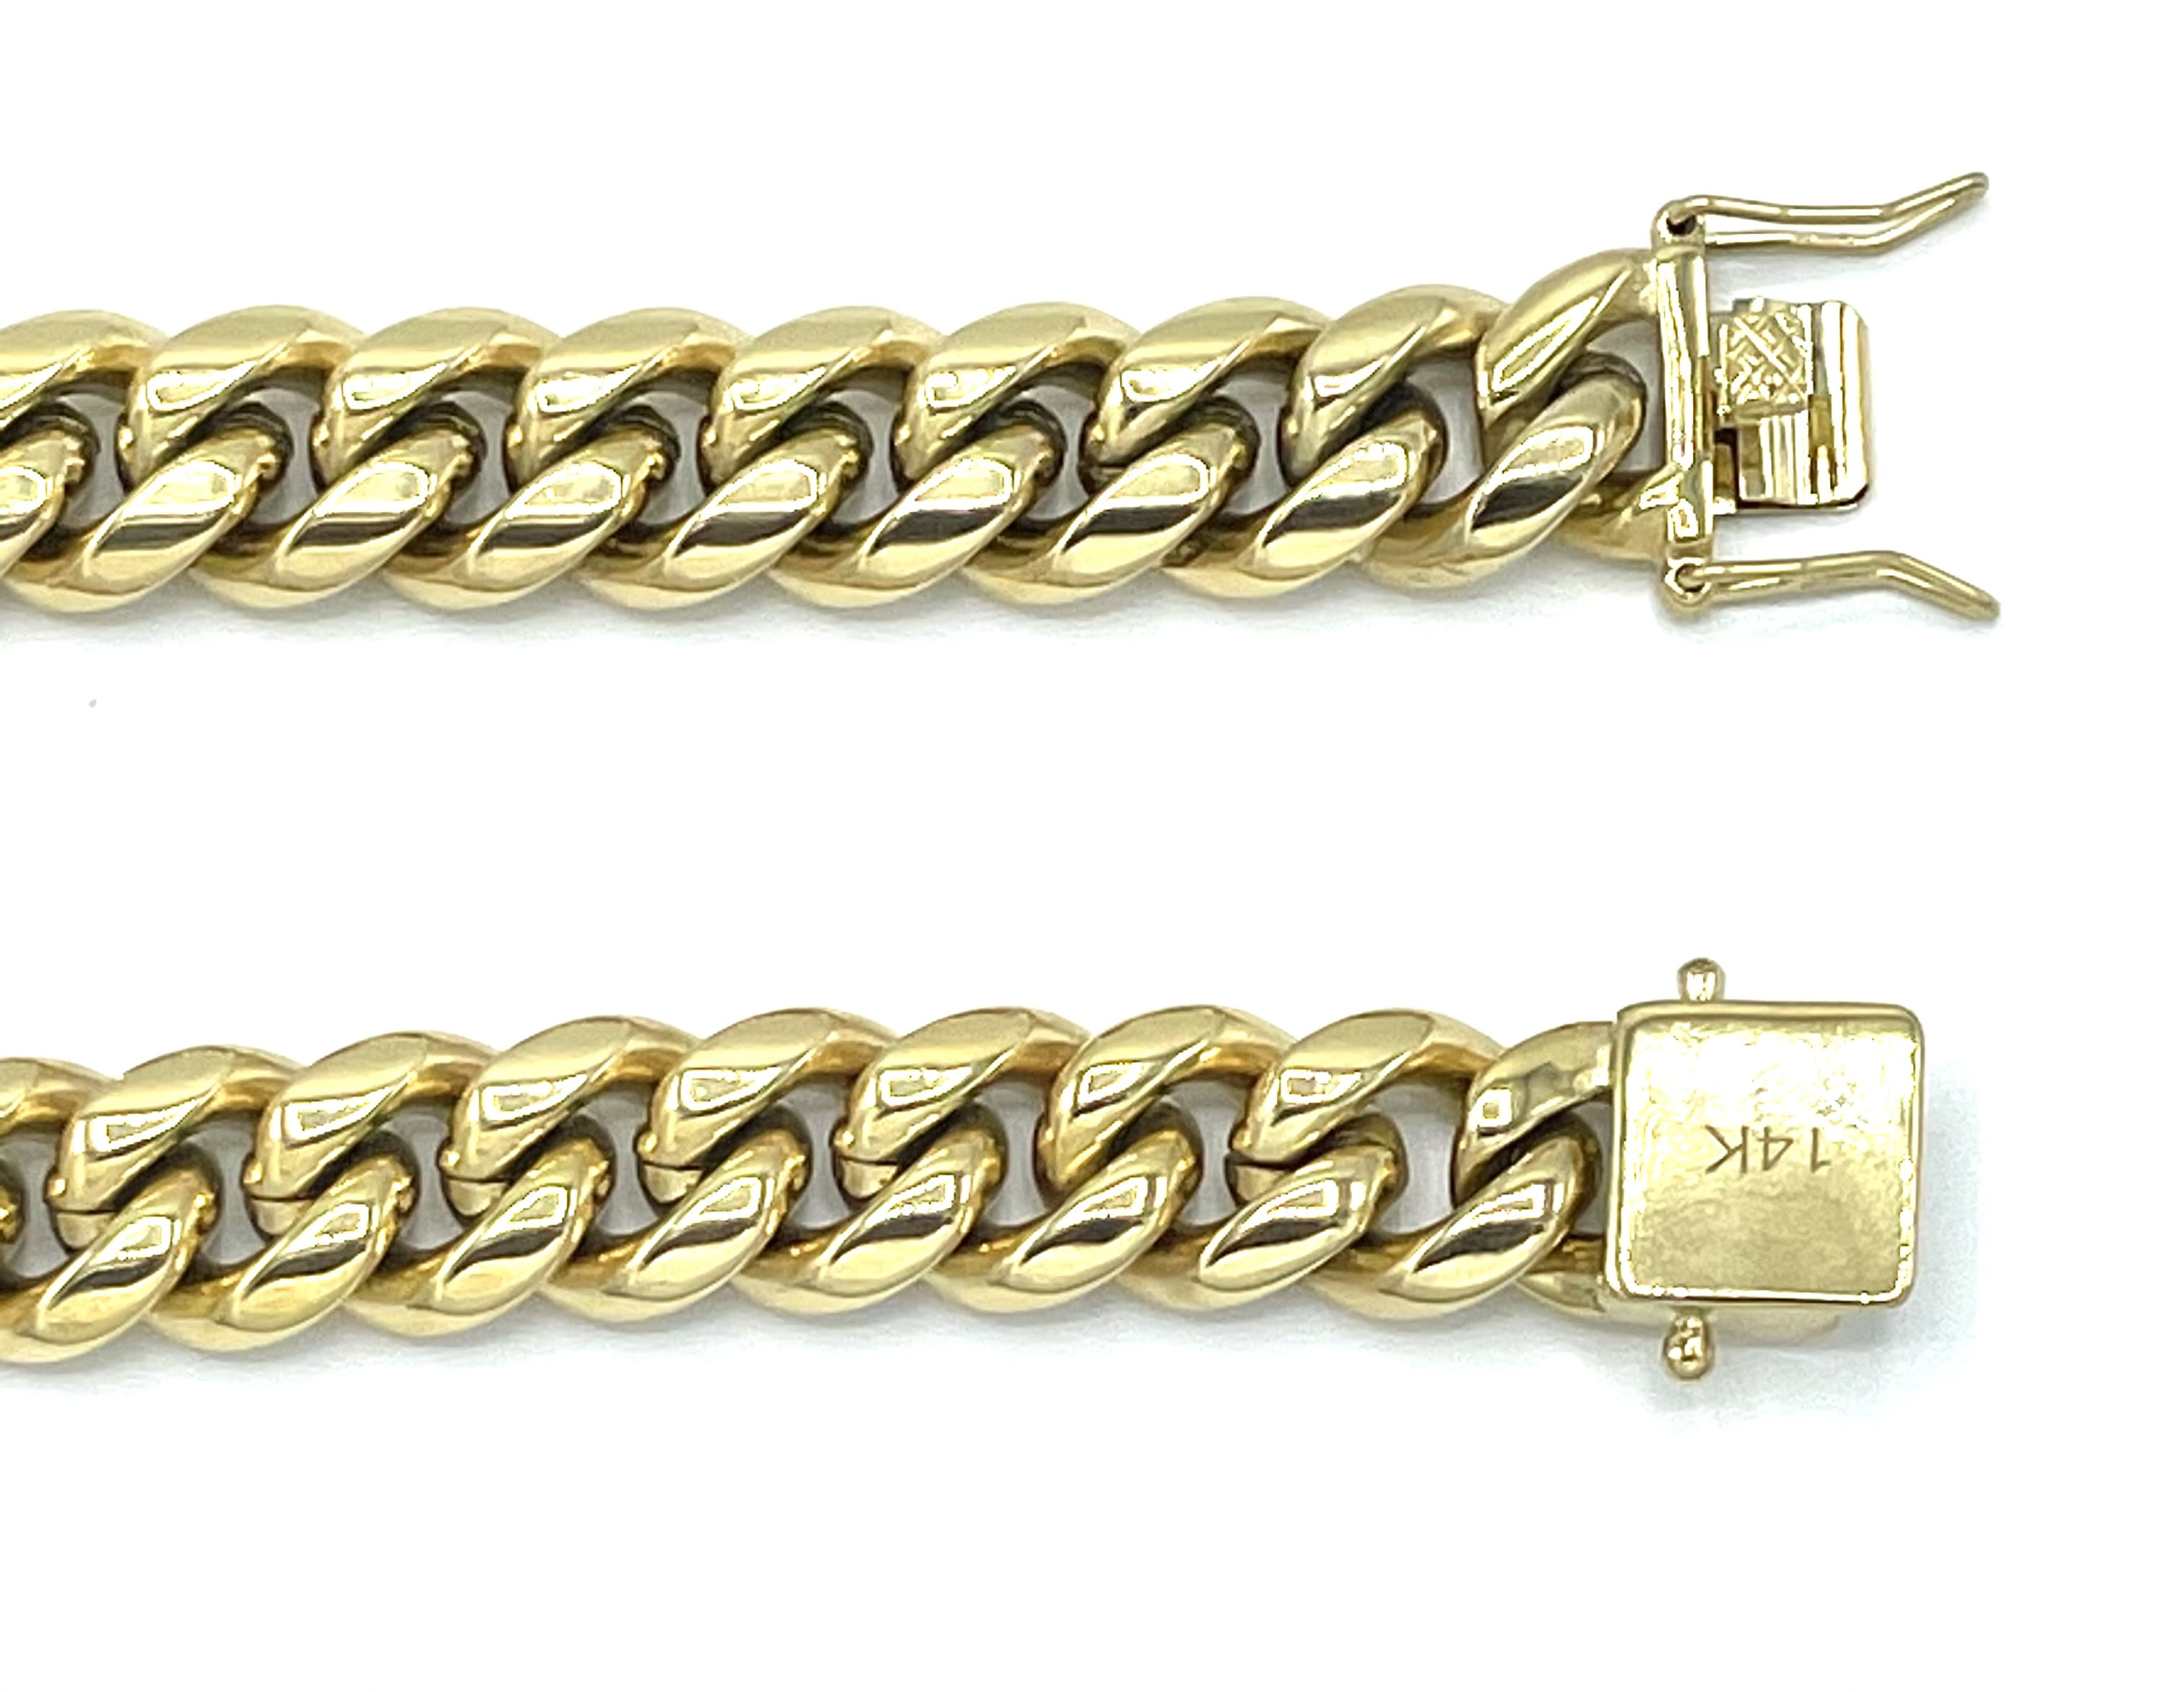 Gold Cuban Link Chain Necklace for Men Real 11MM 24K Karat Diamond Cut Heavy w Solid Thick Clasp US Made